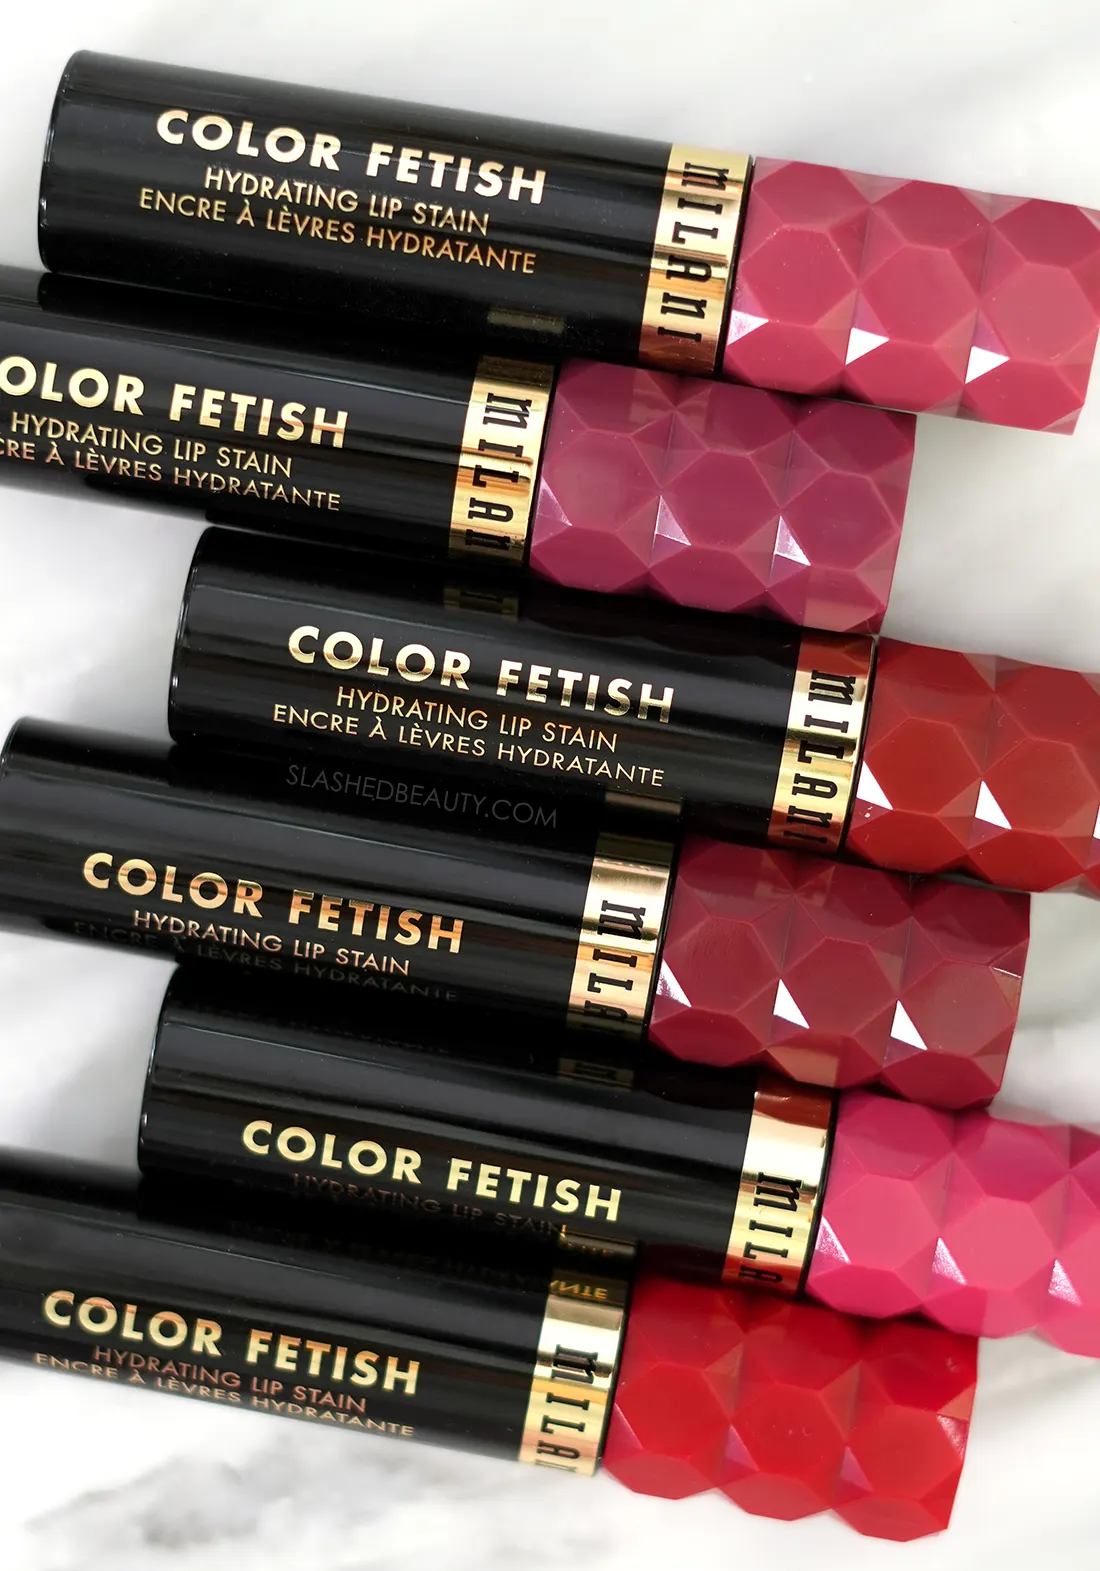 Milani Color Fetish Hydrating Lip Stains lying side by side on marble